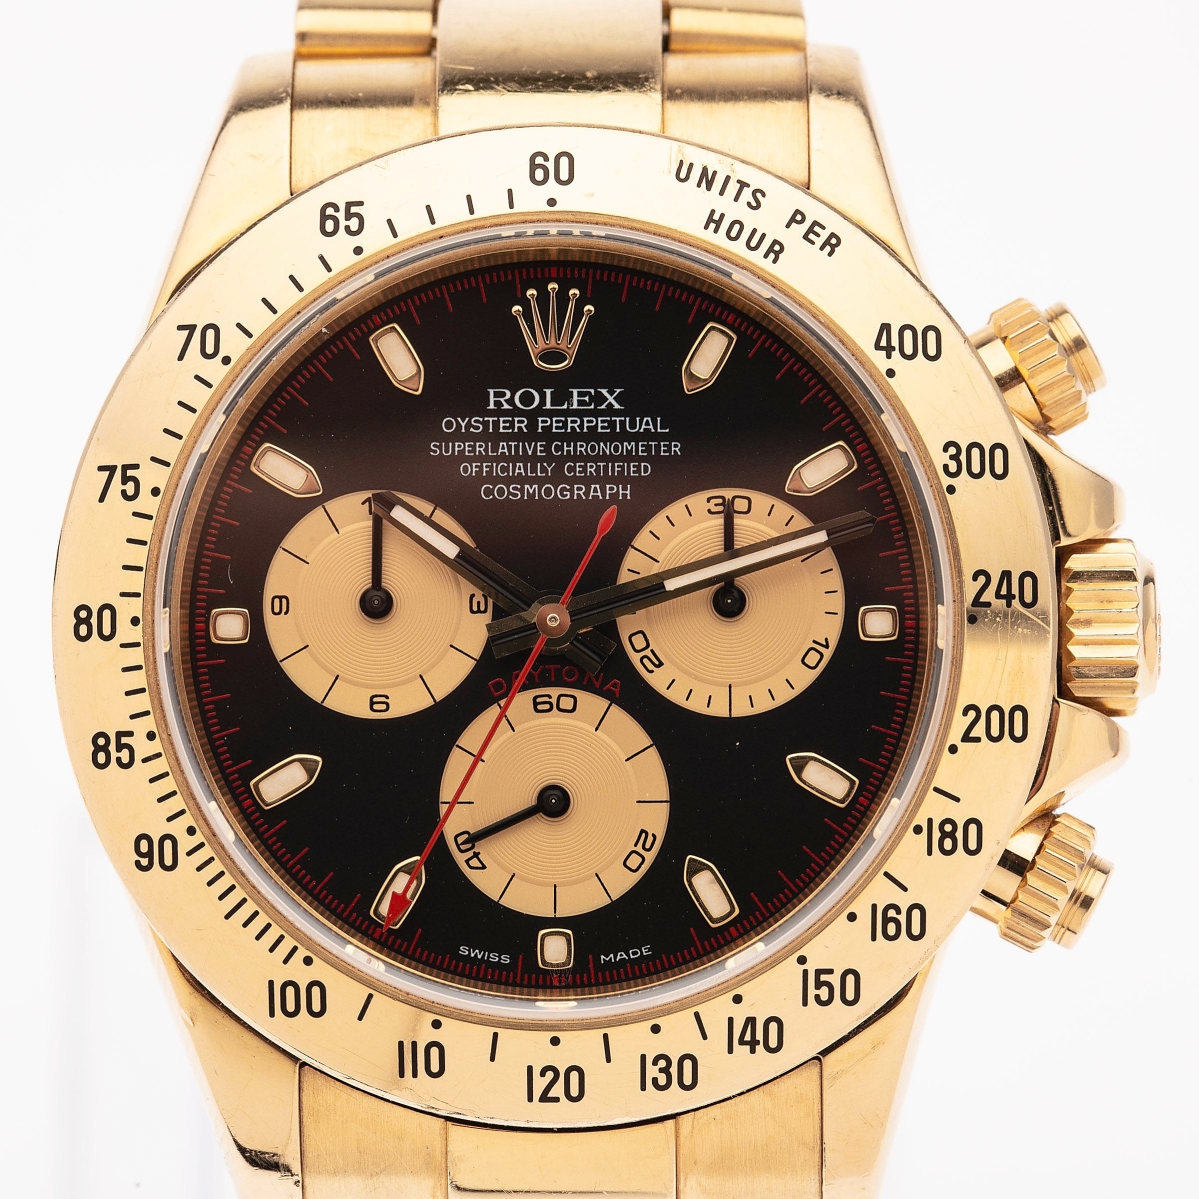 “I’m not surprised at how the watches did. We had a ton of interest in them,” Amanda Everard said regarding the watches in the sale. This Rolex Daytona 18K gold and black man’s watch, circa 2005, was one of seven watches from a Bluffton, S.C., estate. It sold to a phone bidder for $35,000 ($25/35,000).